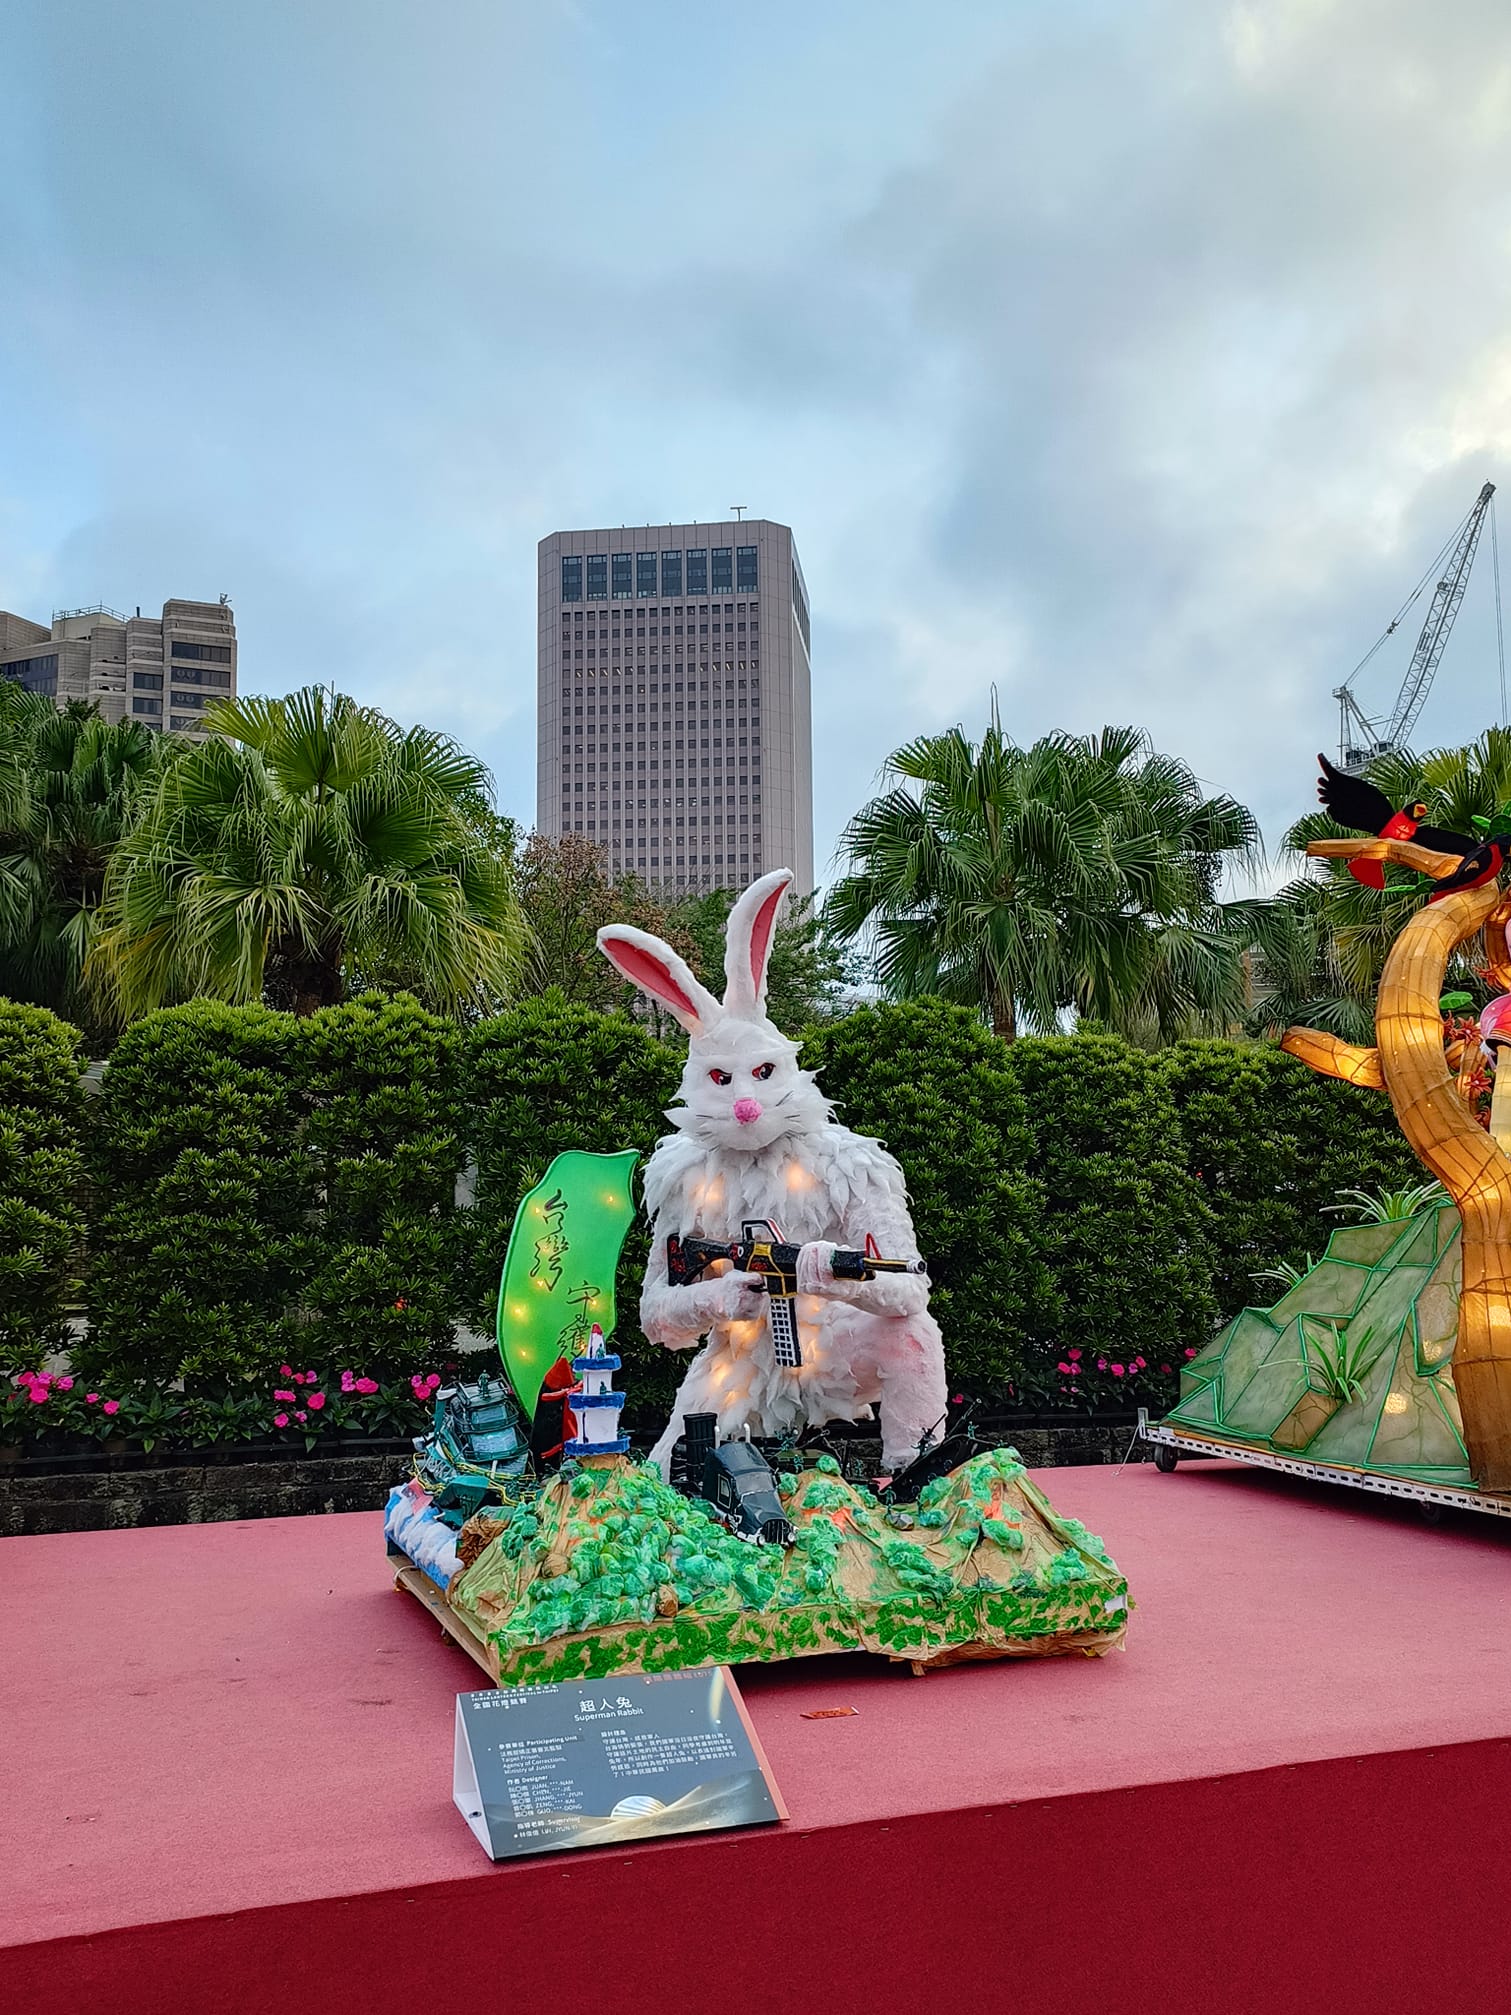 A macho killer rabbit lantern has been spotted at the lantern festival in taipei